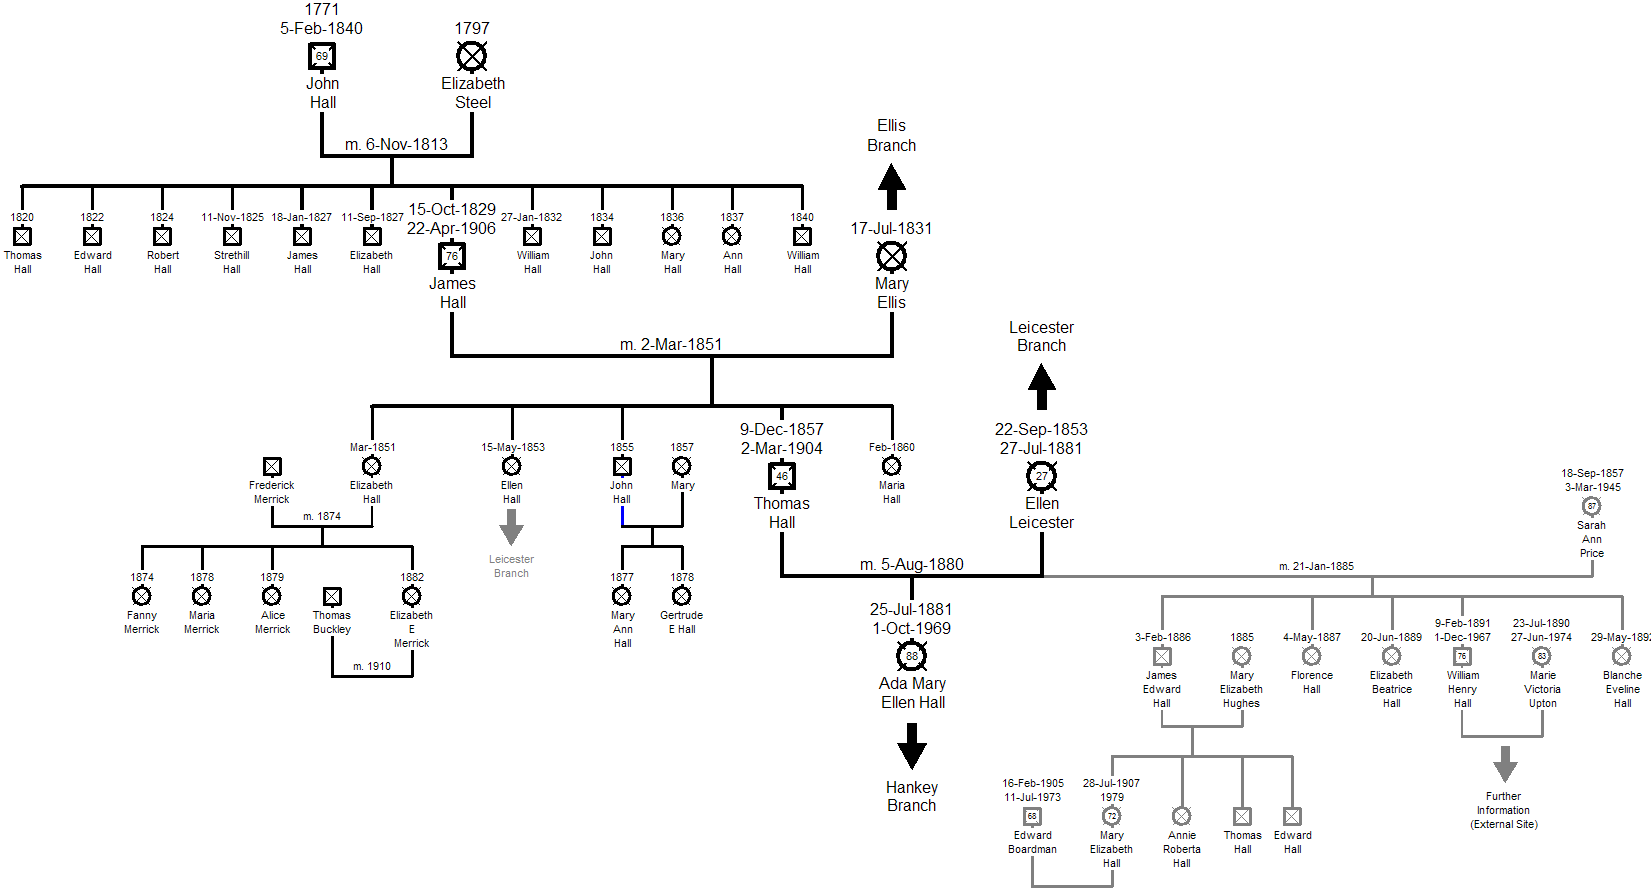 Family Tree of the Hall Branch